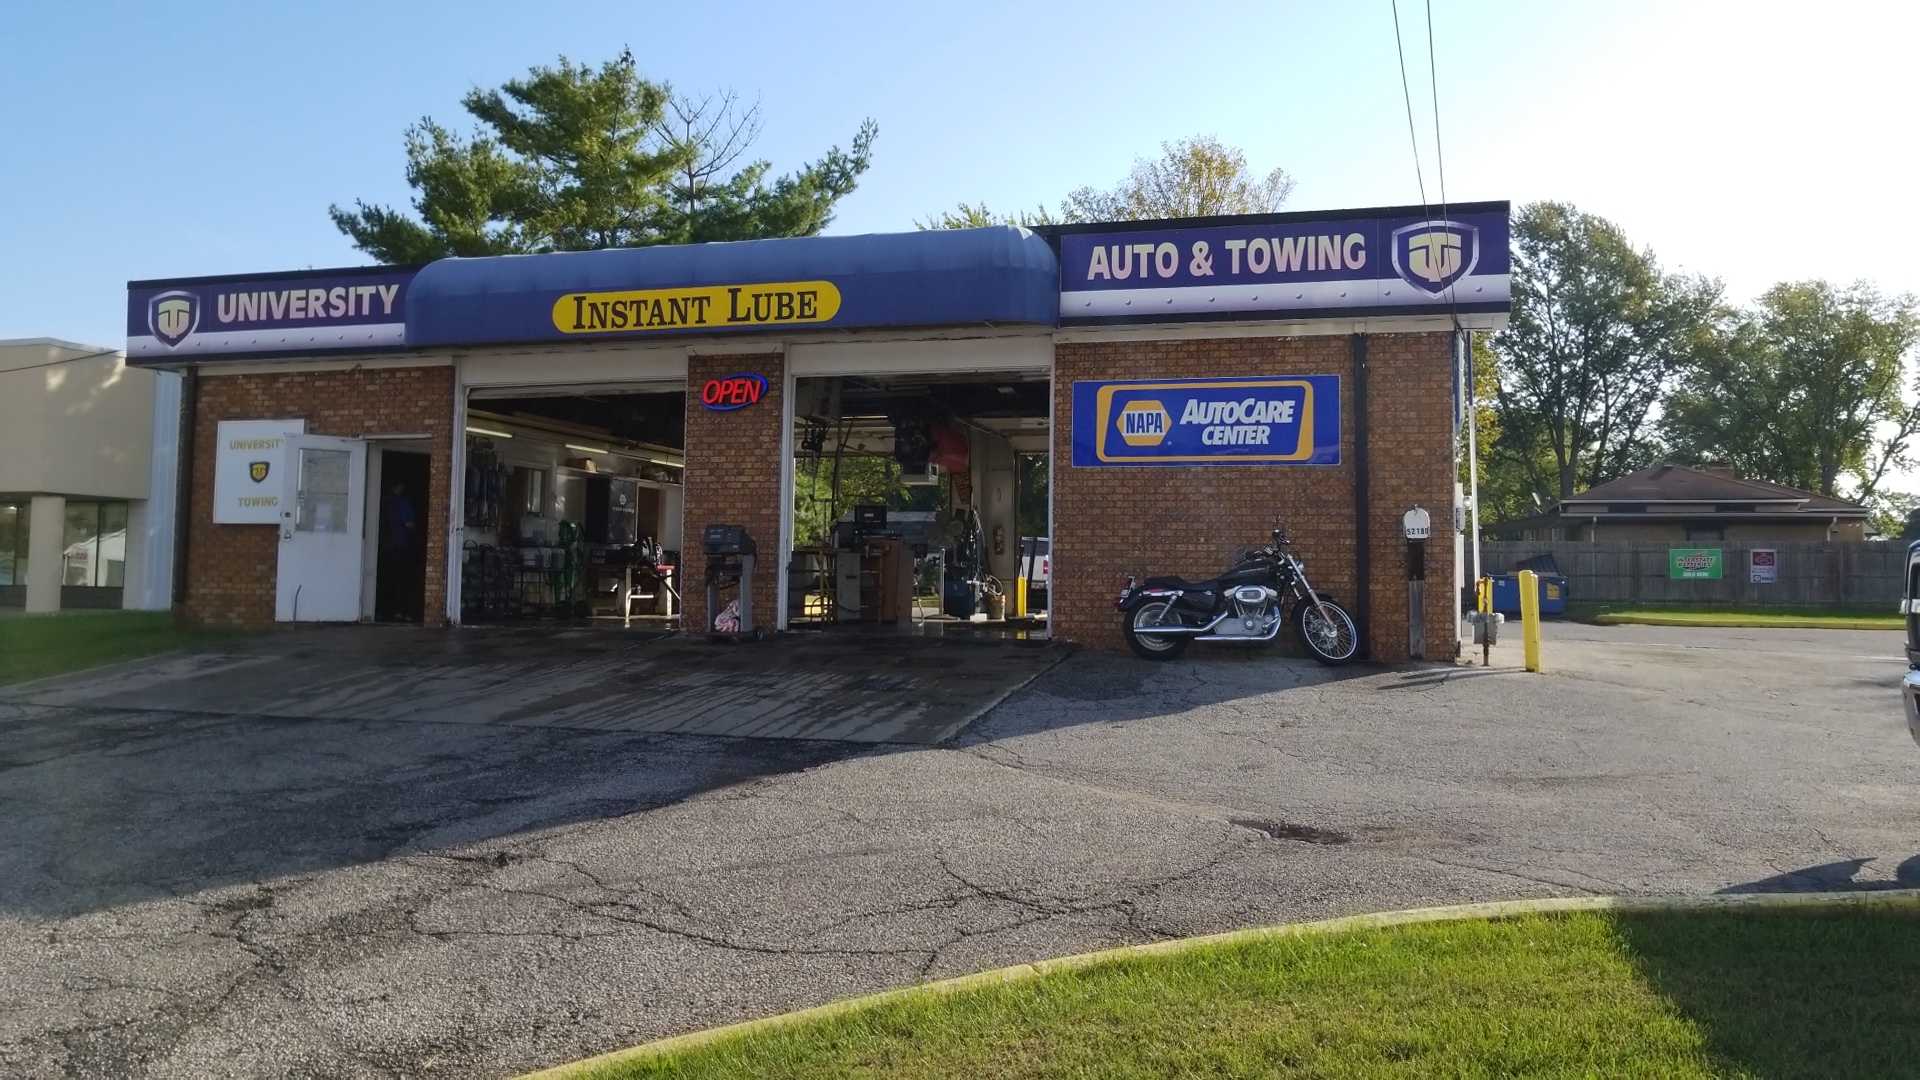 University Auto and towing LLC